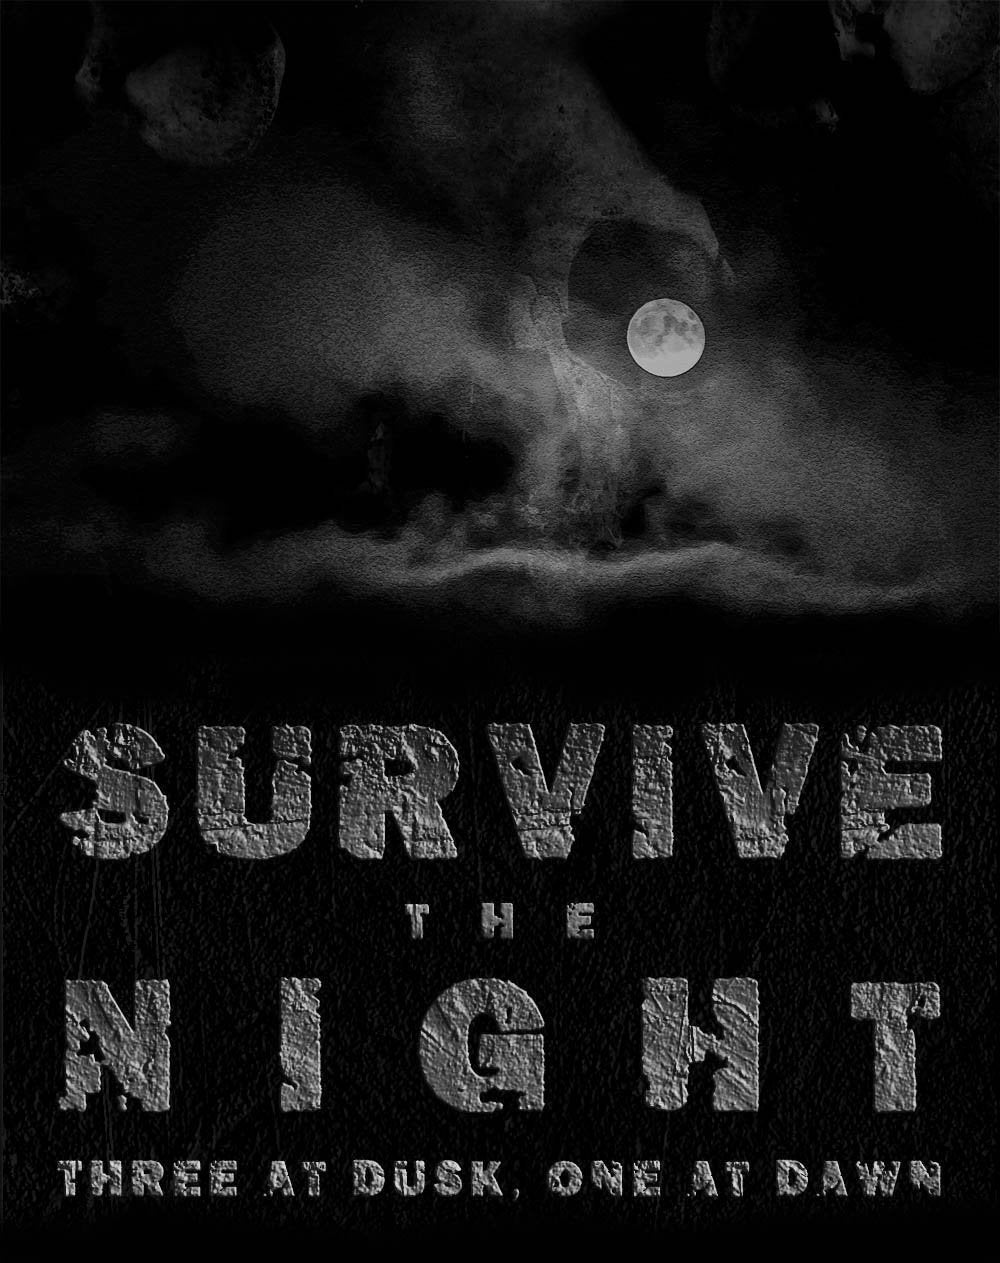 Dark Regions Press Adding $1,000 to Prize Pool for Survive the Night Writing Contest